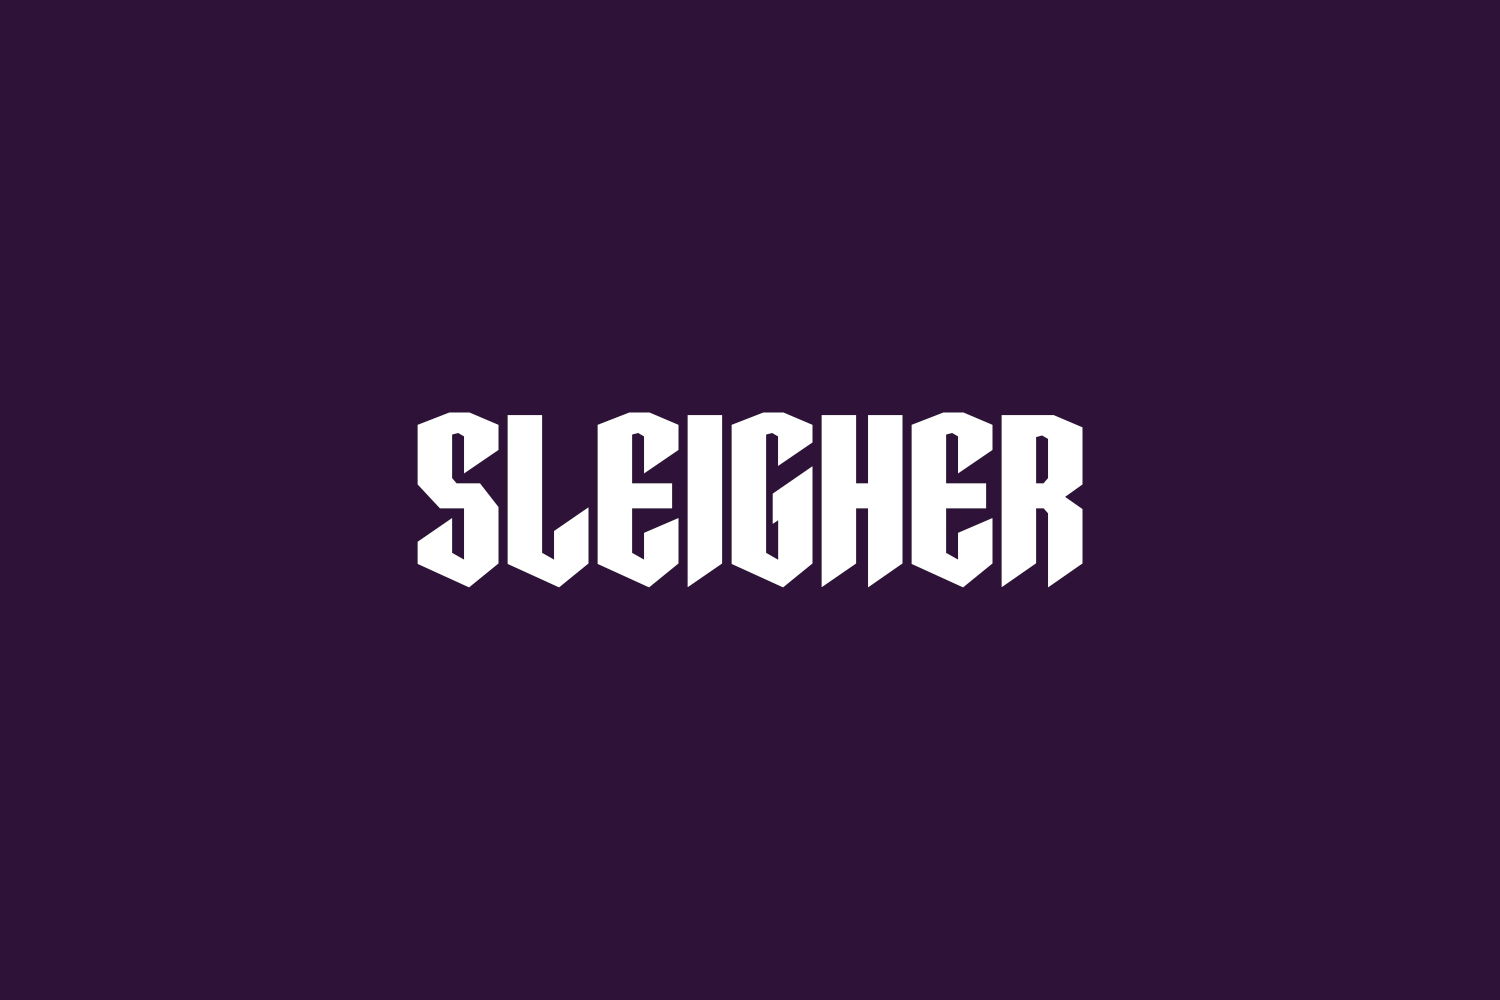 Sleigher Free Font